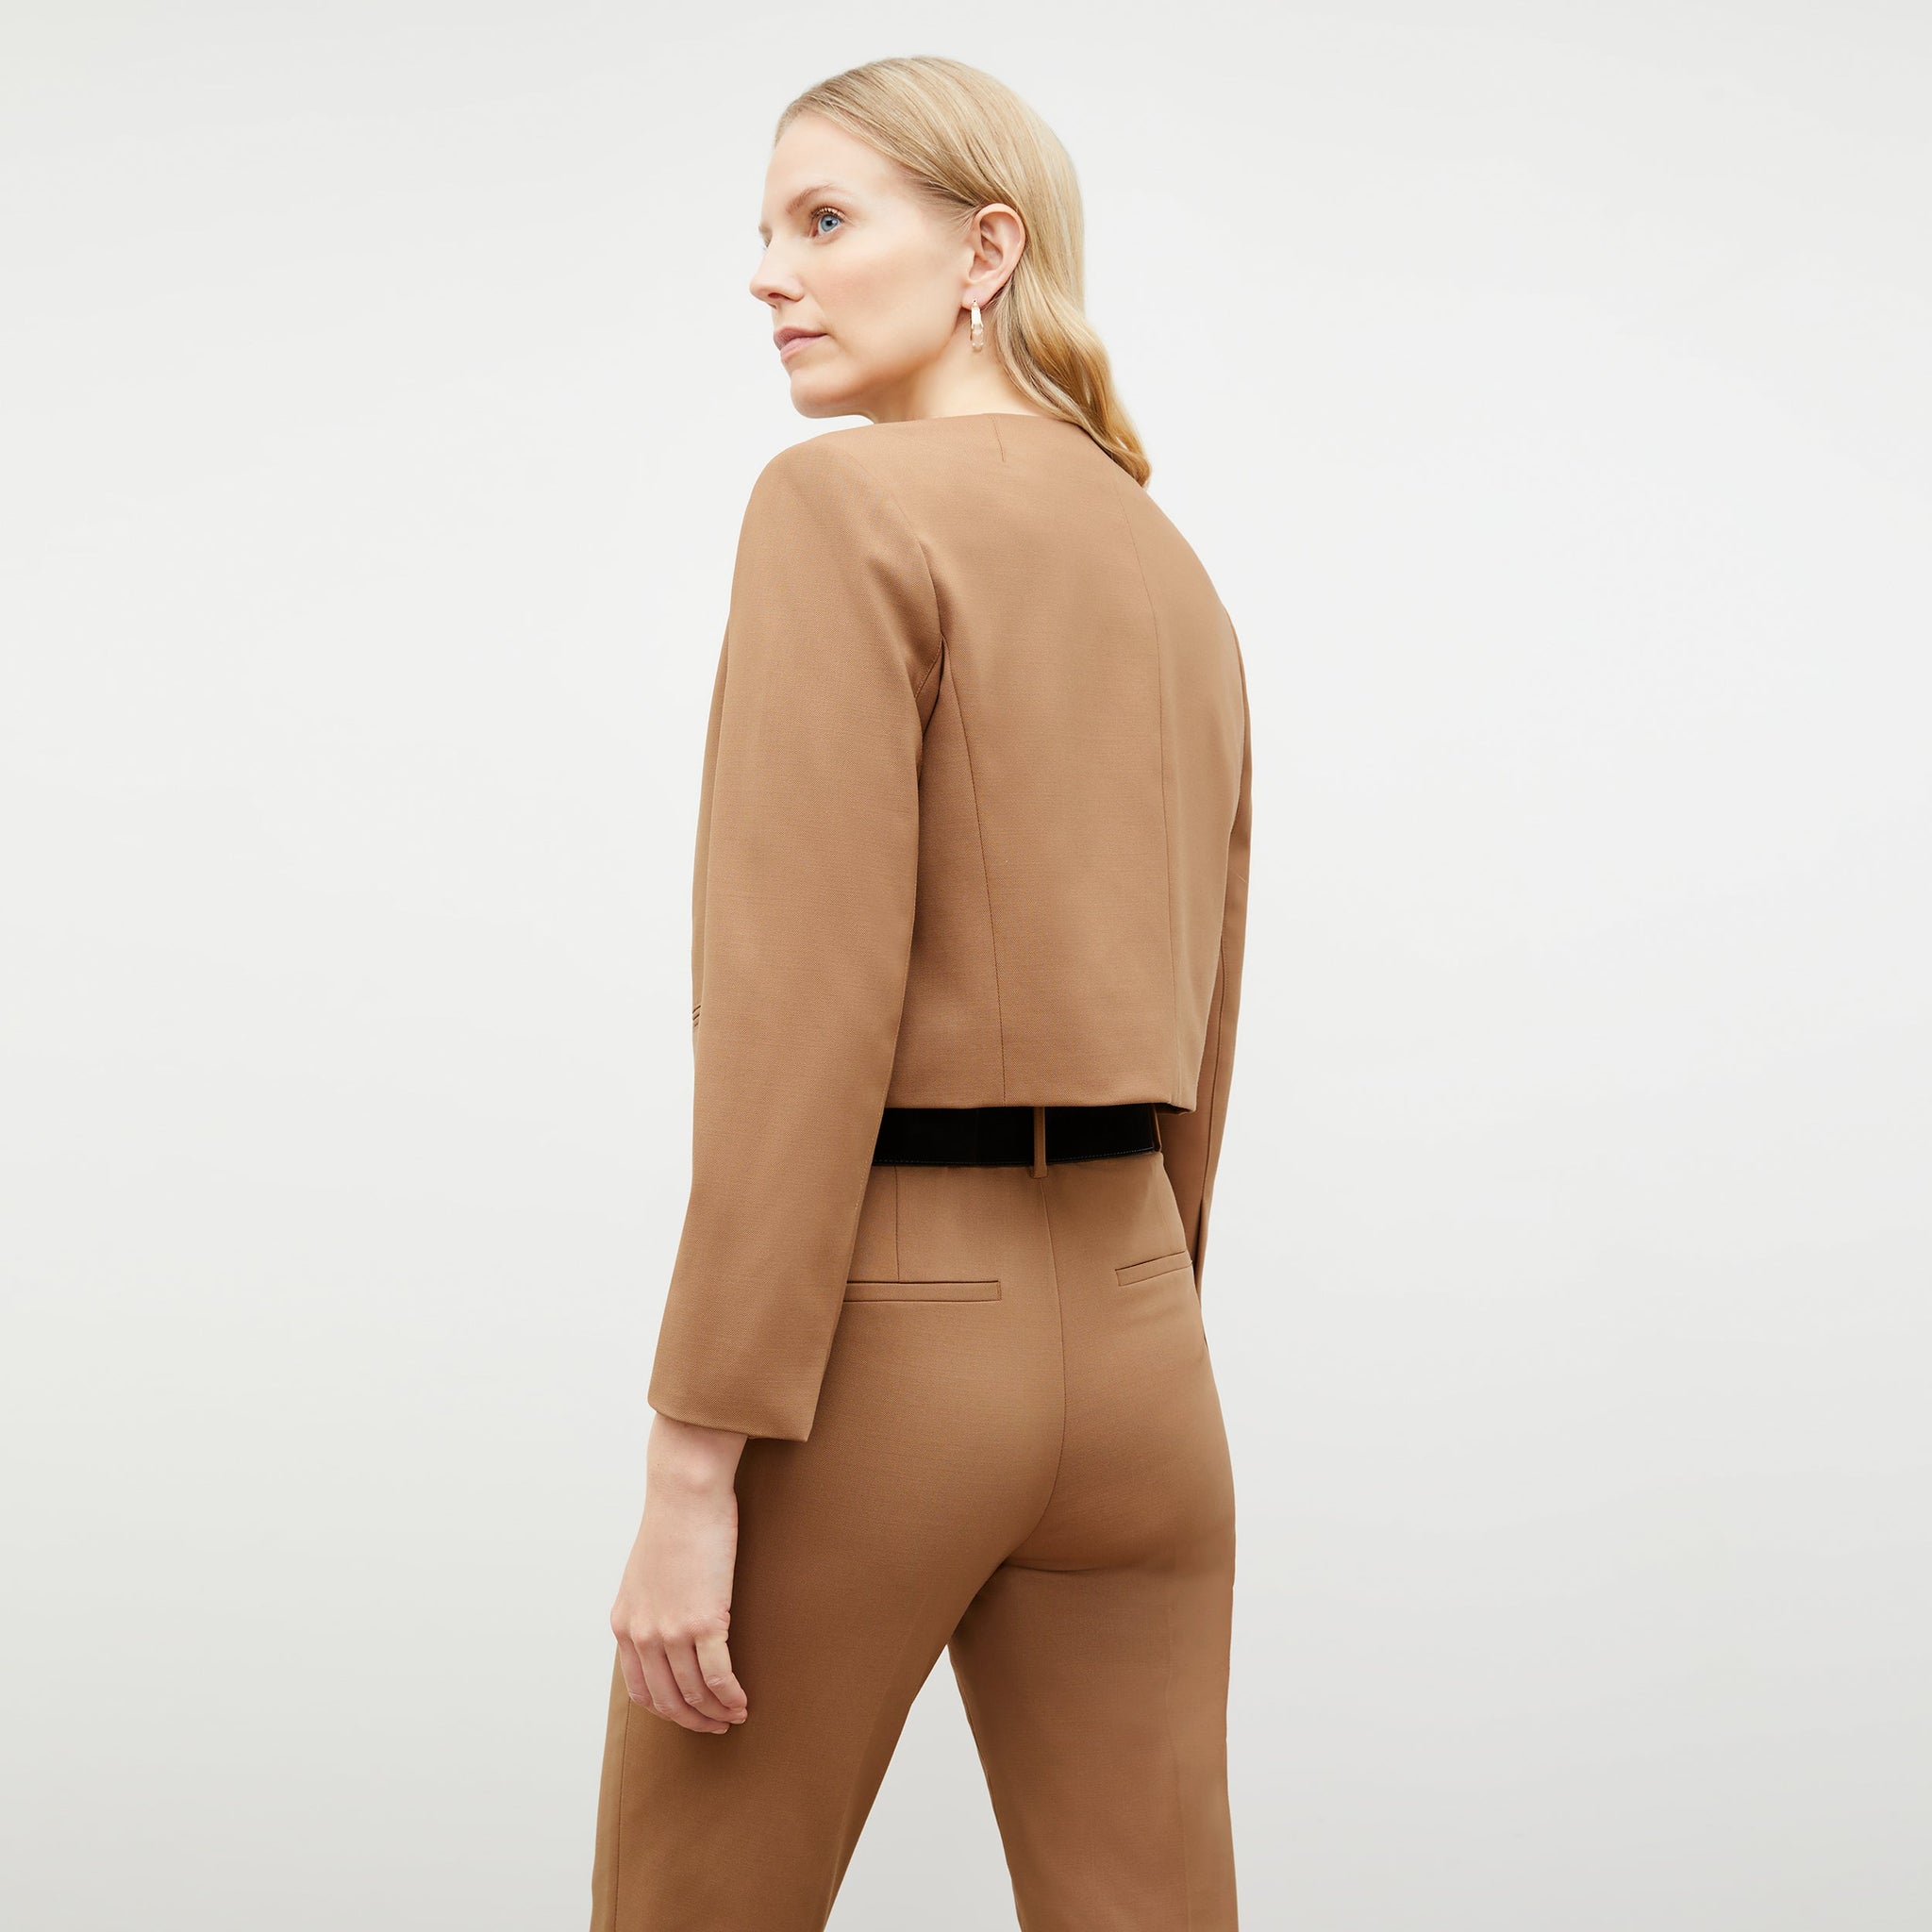 Back image of a woman standing wearing the Neale jacket in camel